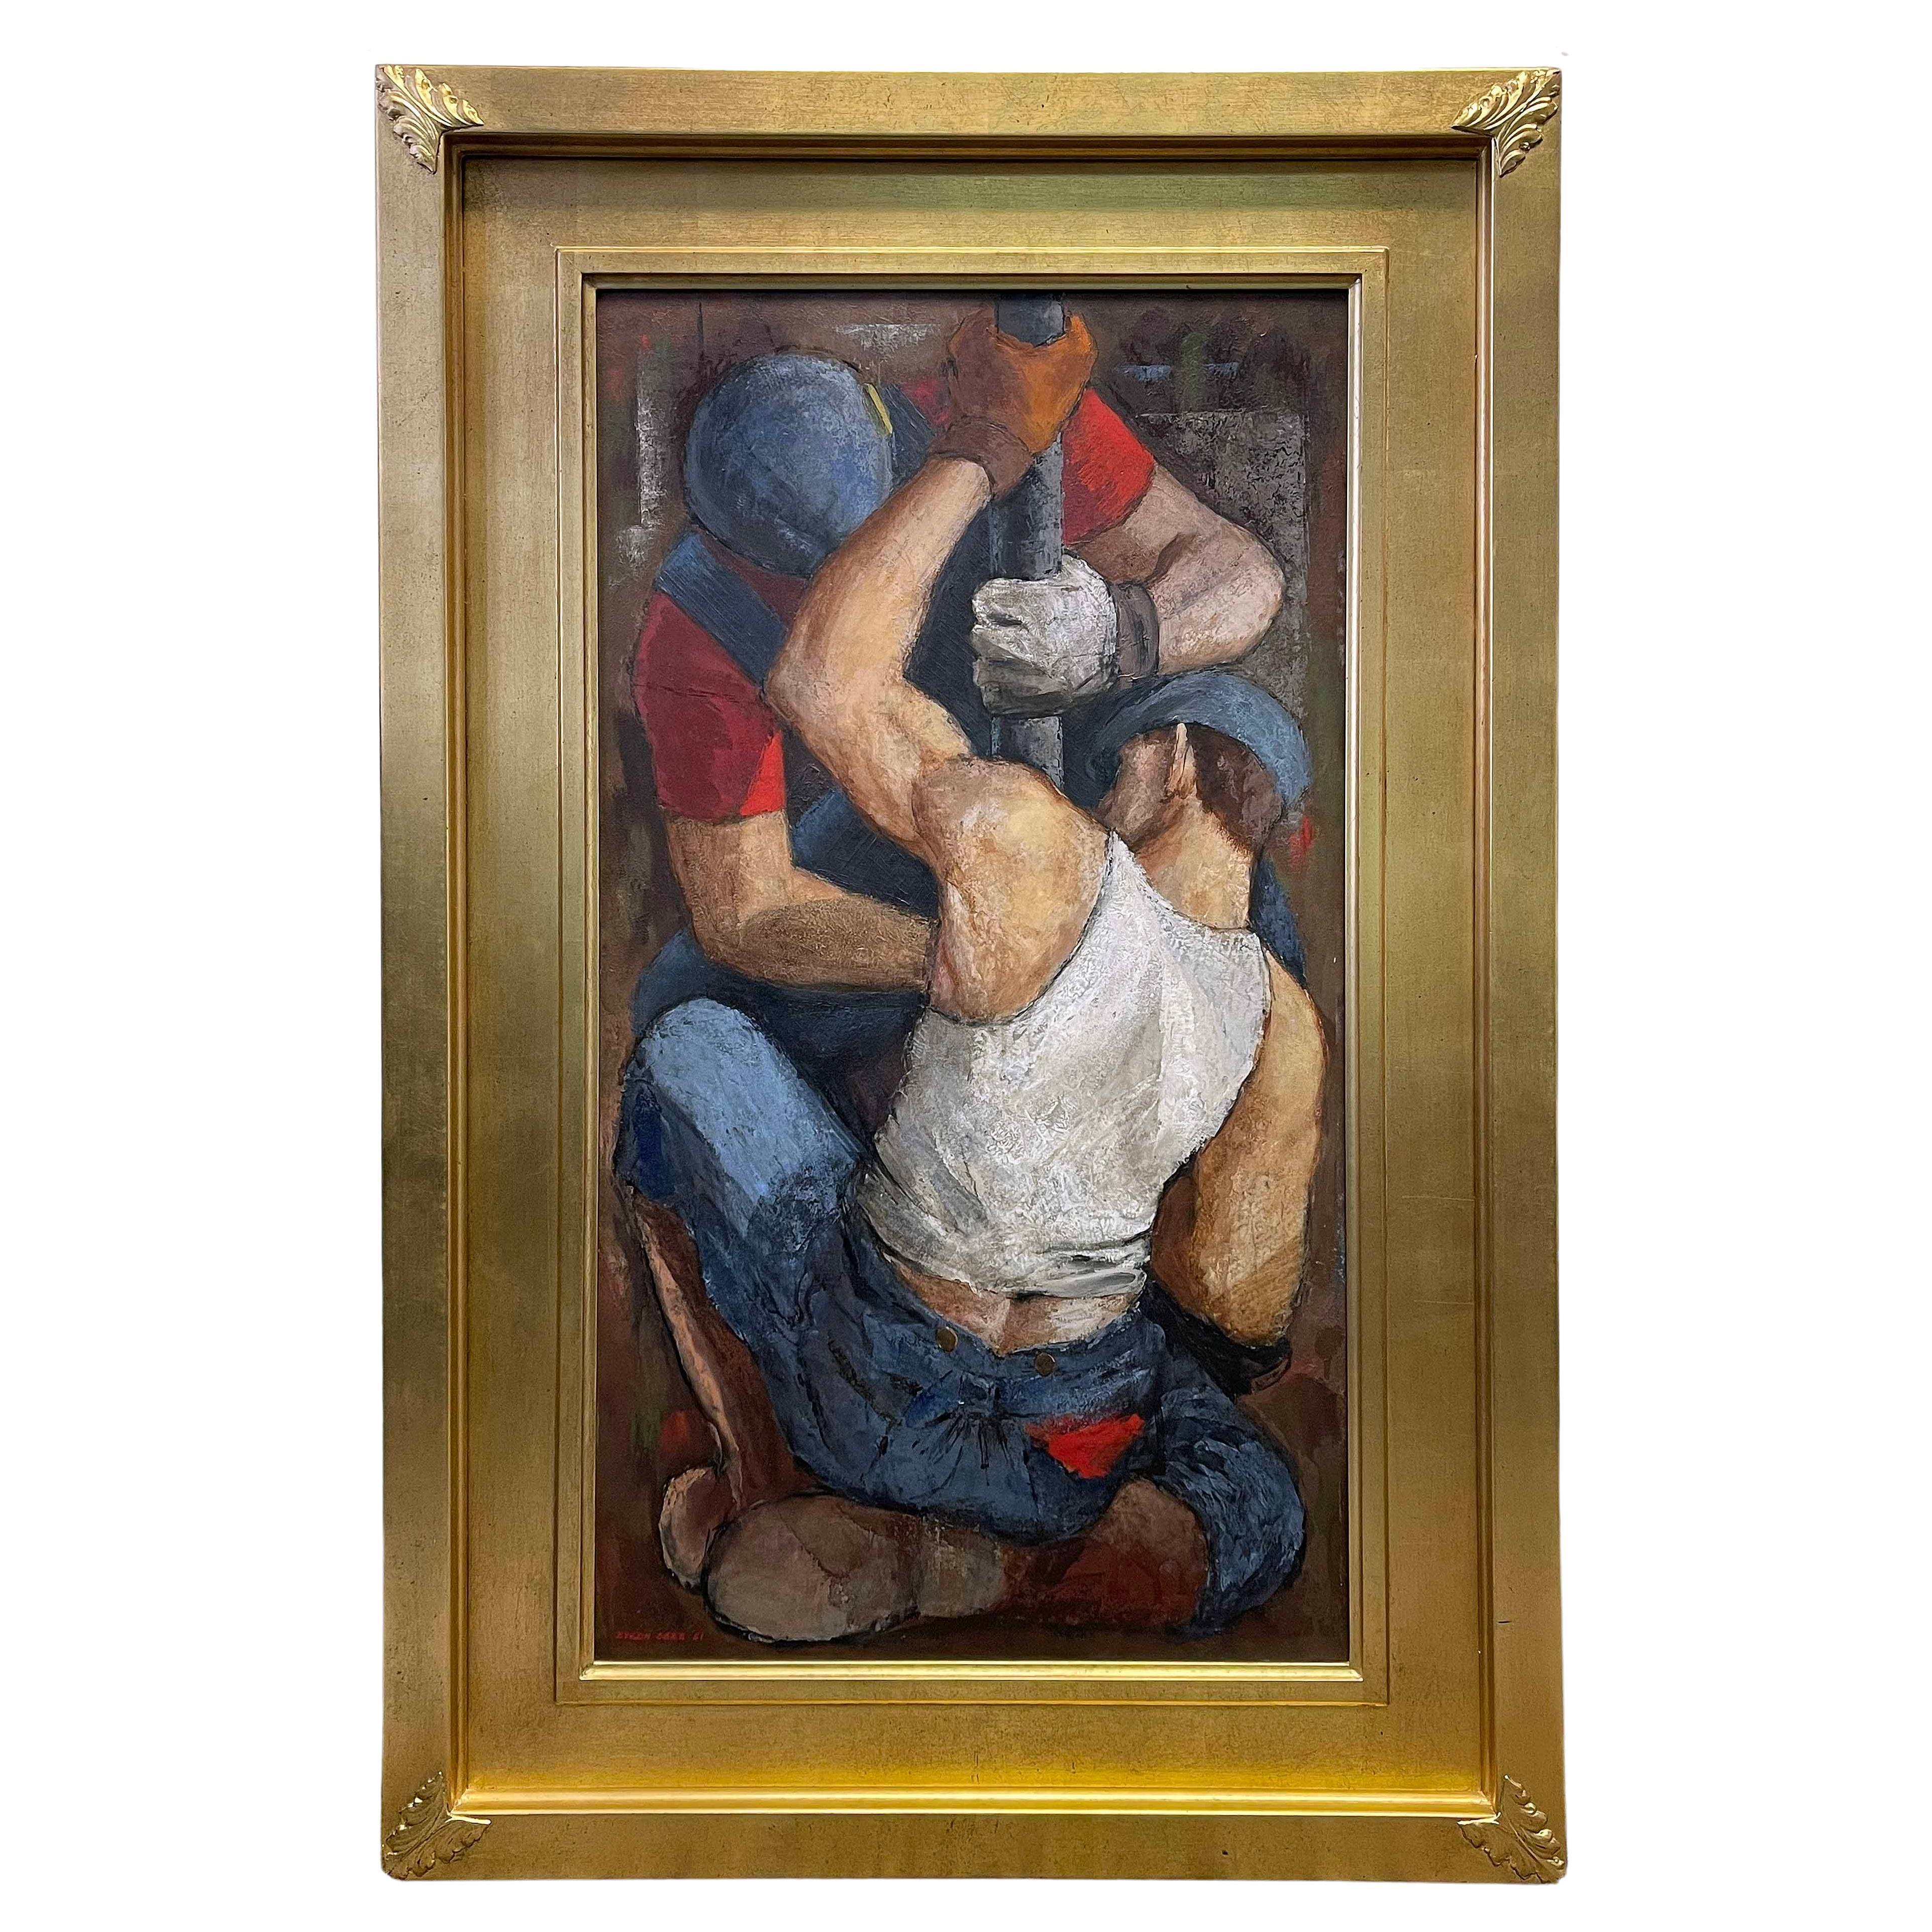 Although this painting dates to 1951, a few years after the Works Progress Administration (WPA) period ended in the 1940s, this tight composition of two pipe fitters doing their work in a cramped space is very much akin to America's Depression-era